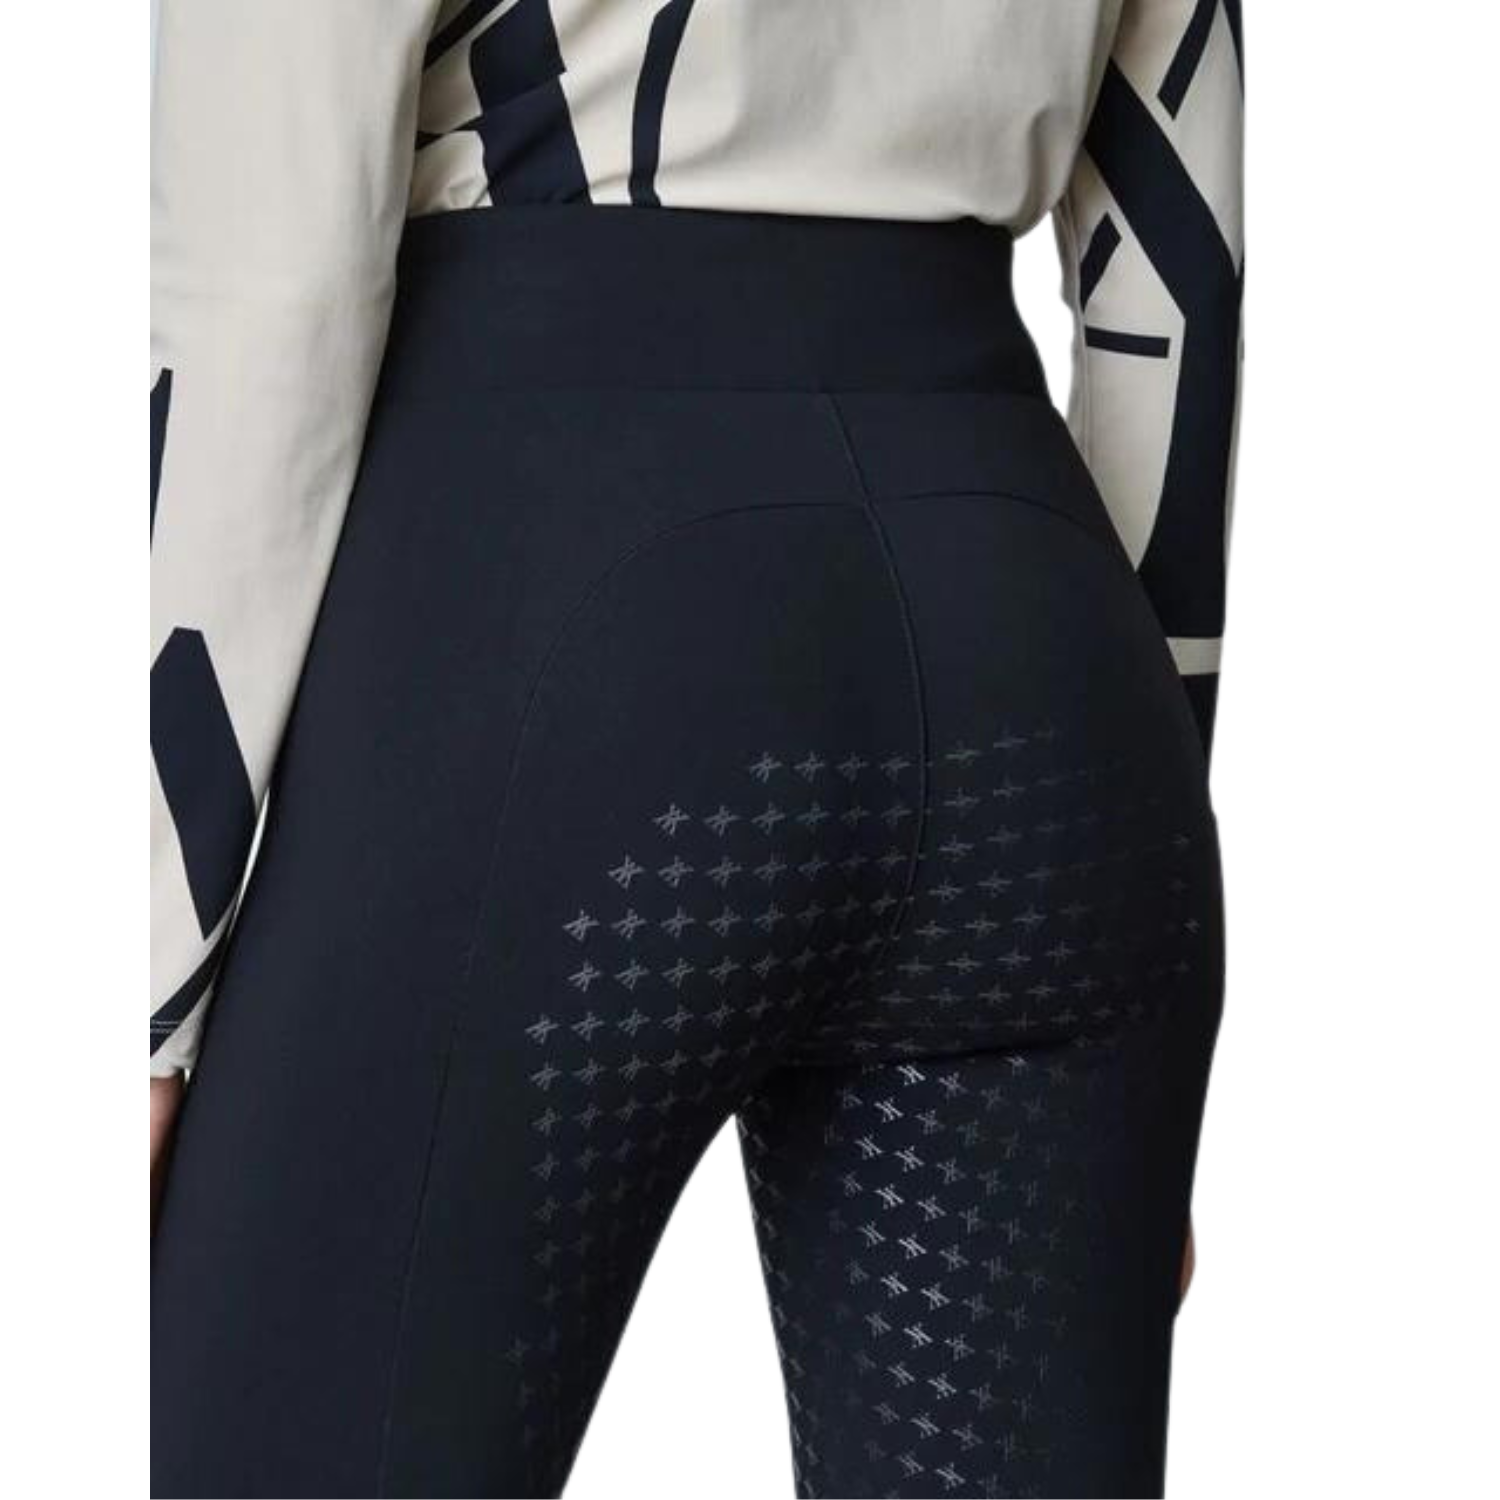 Ladies Compression Pull-On Knee Grip Breeches - Black